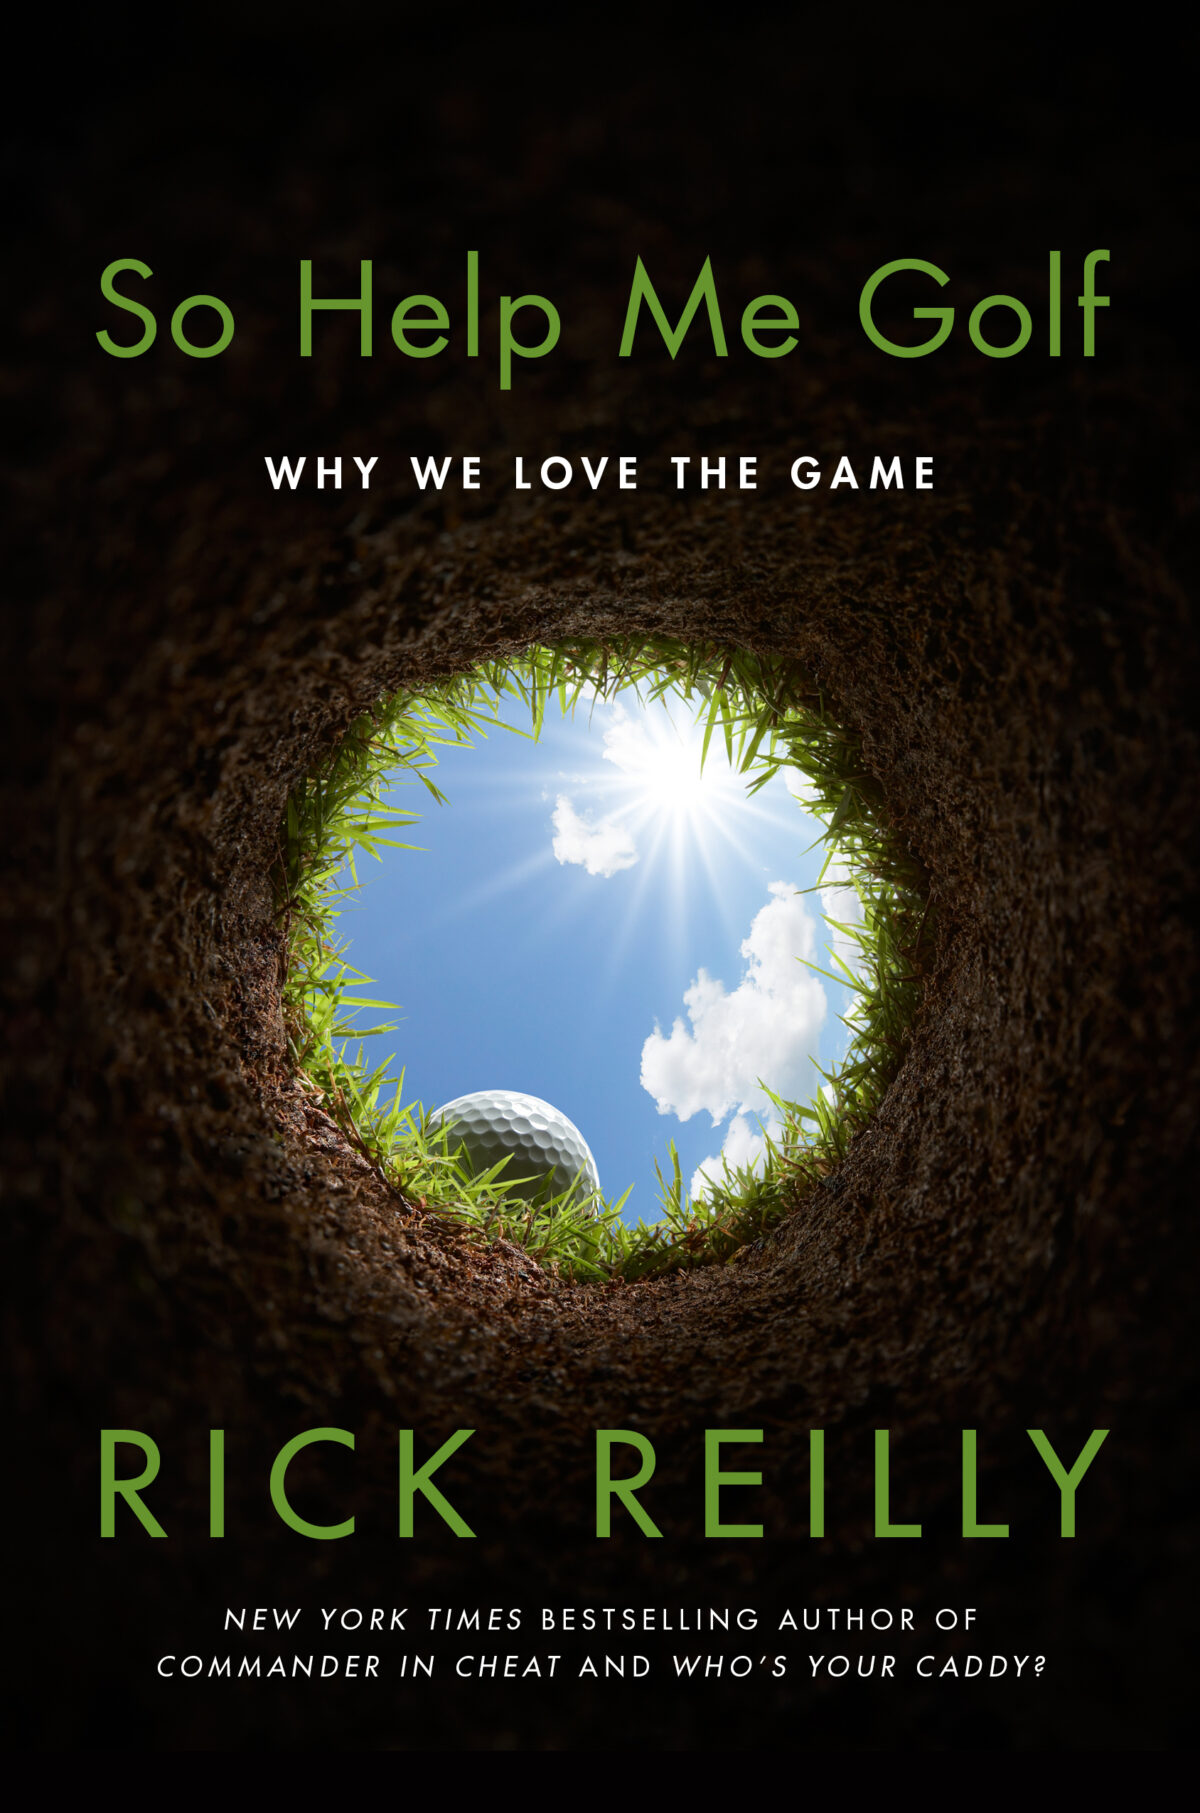 Rick Reilly’s ‘So help me golf’ is a love note to the game that will make you laugh and cry